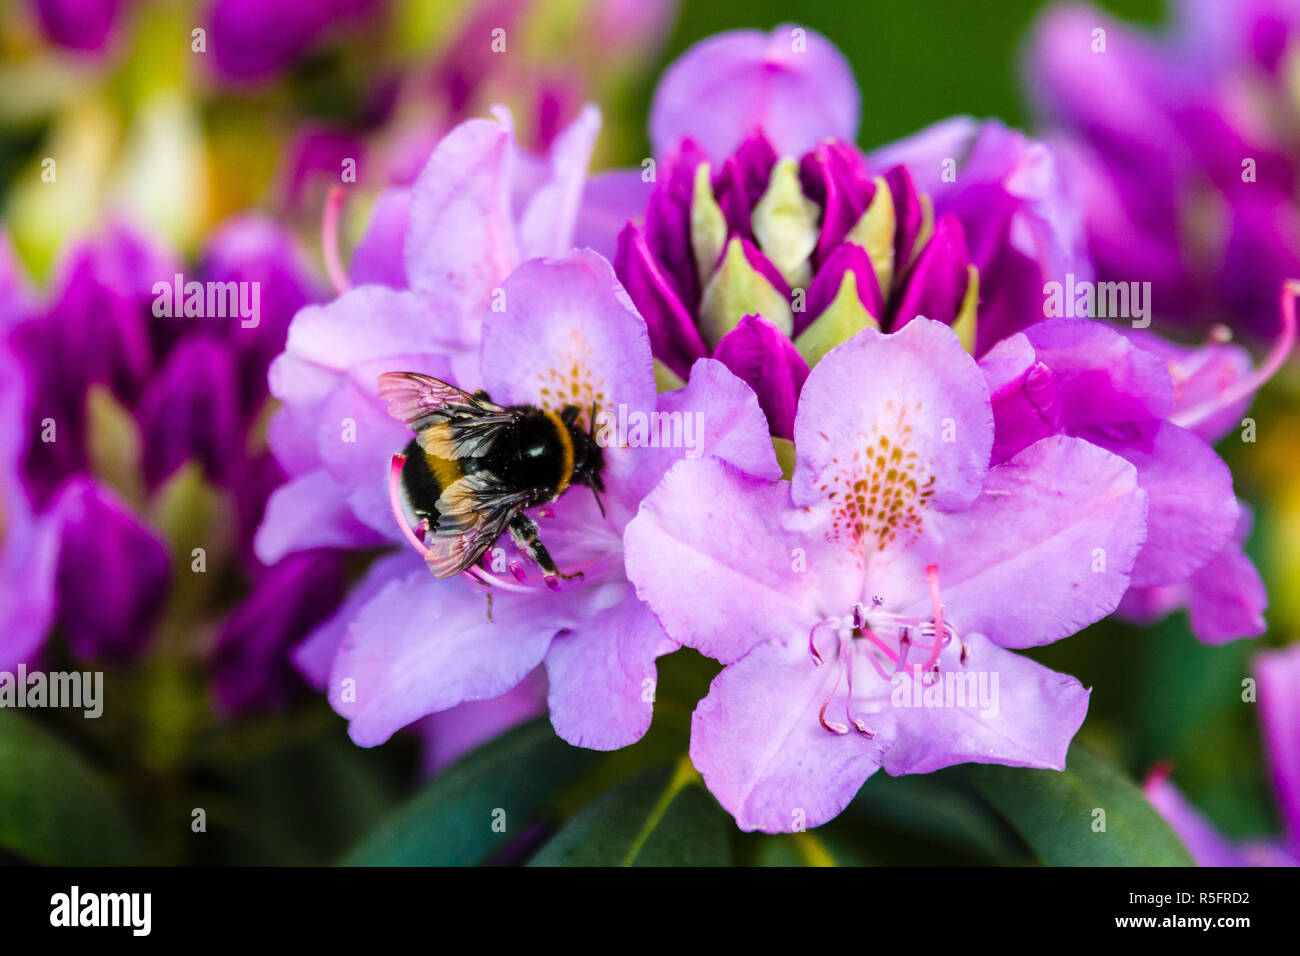 Blooming of Rhododendron. Bumblebee on a flower. Stock Photo